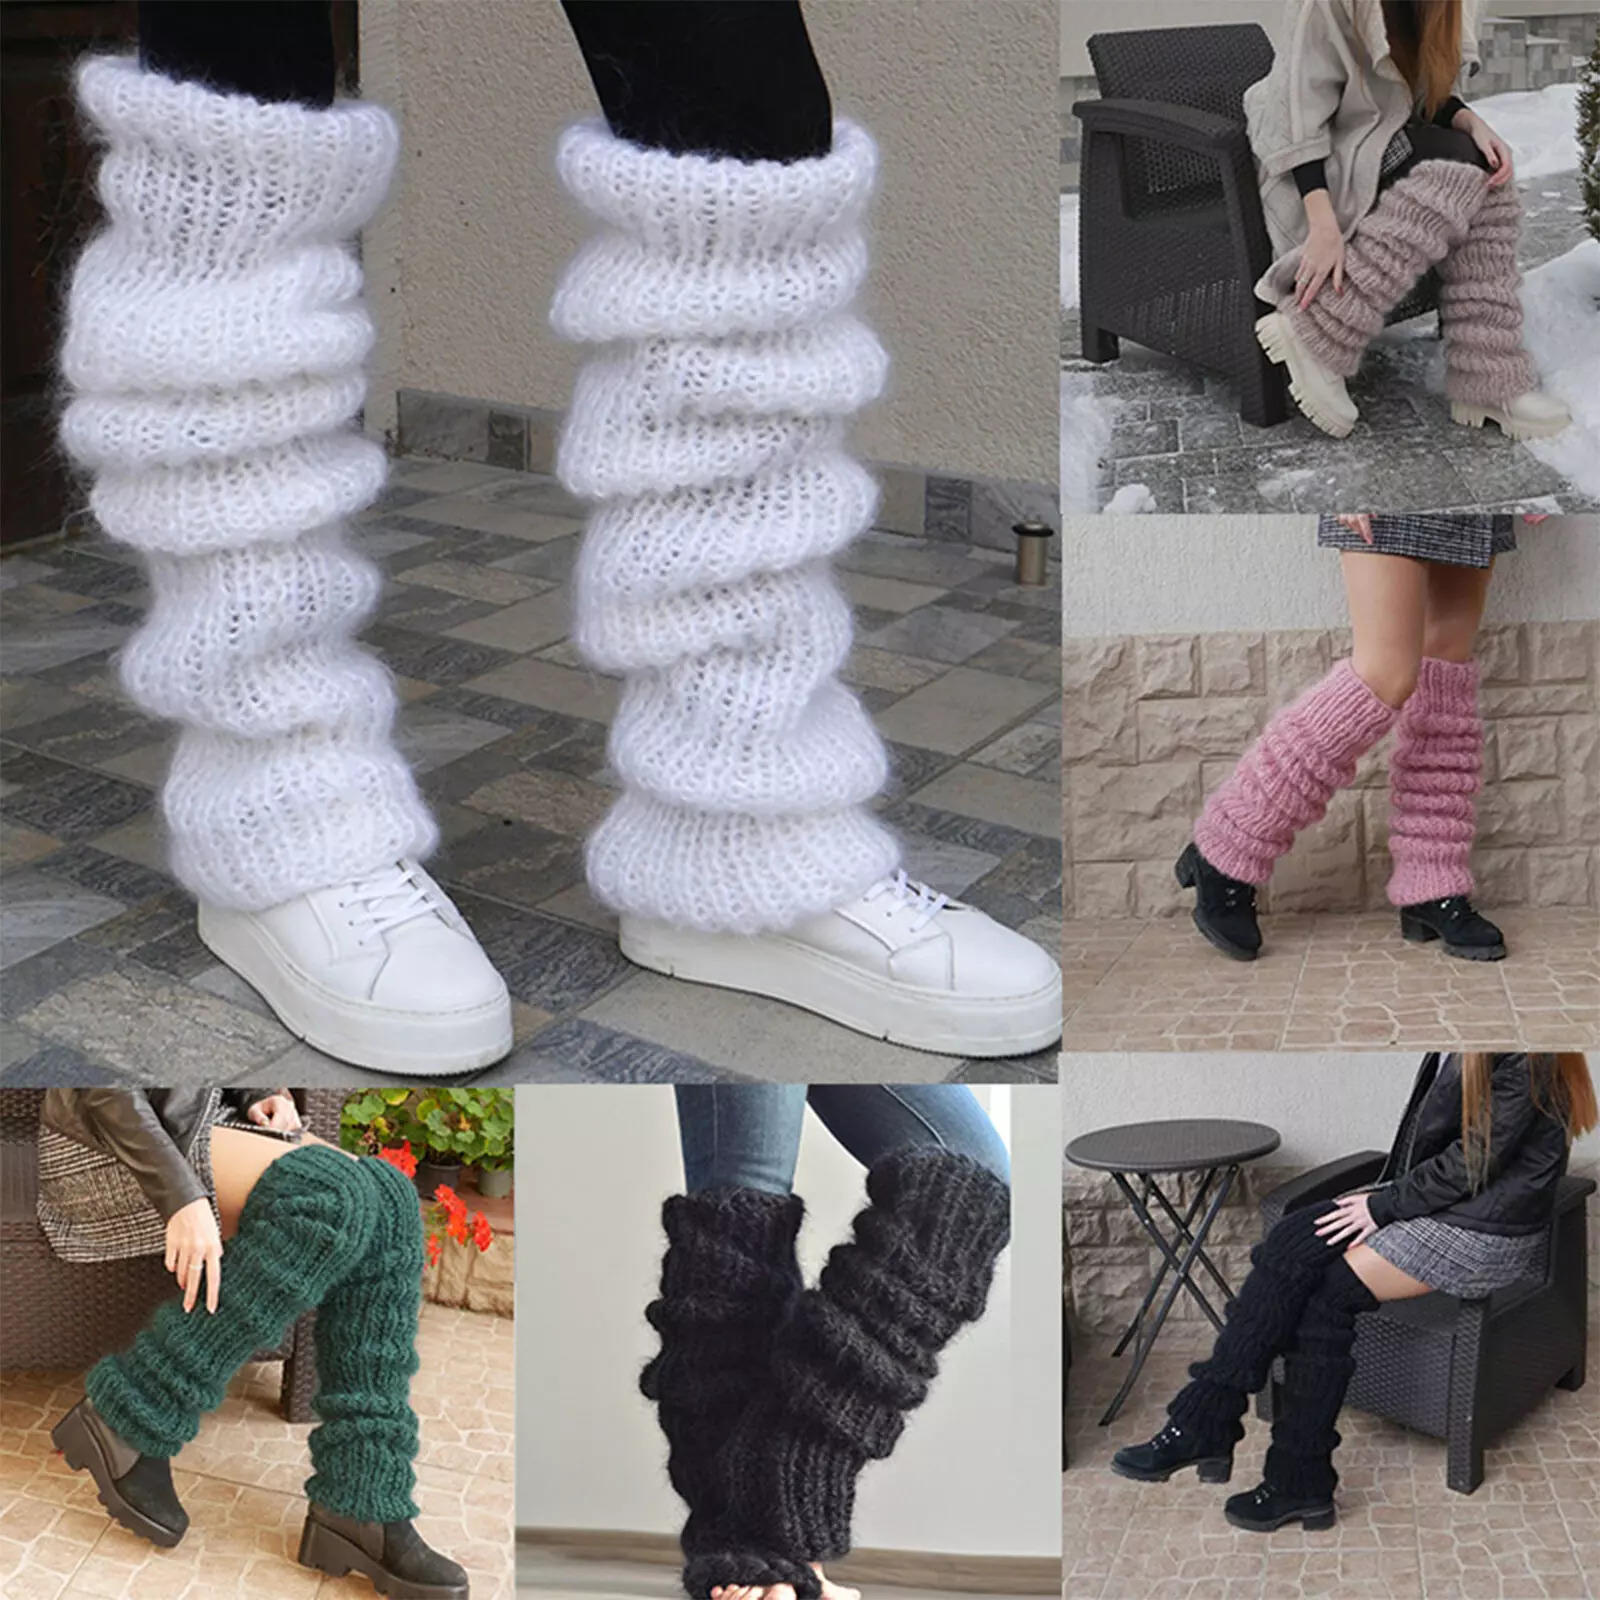 Best leg warmers for women to stay cozy and stylish